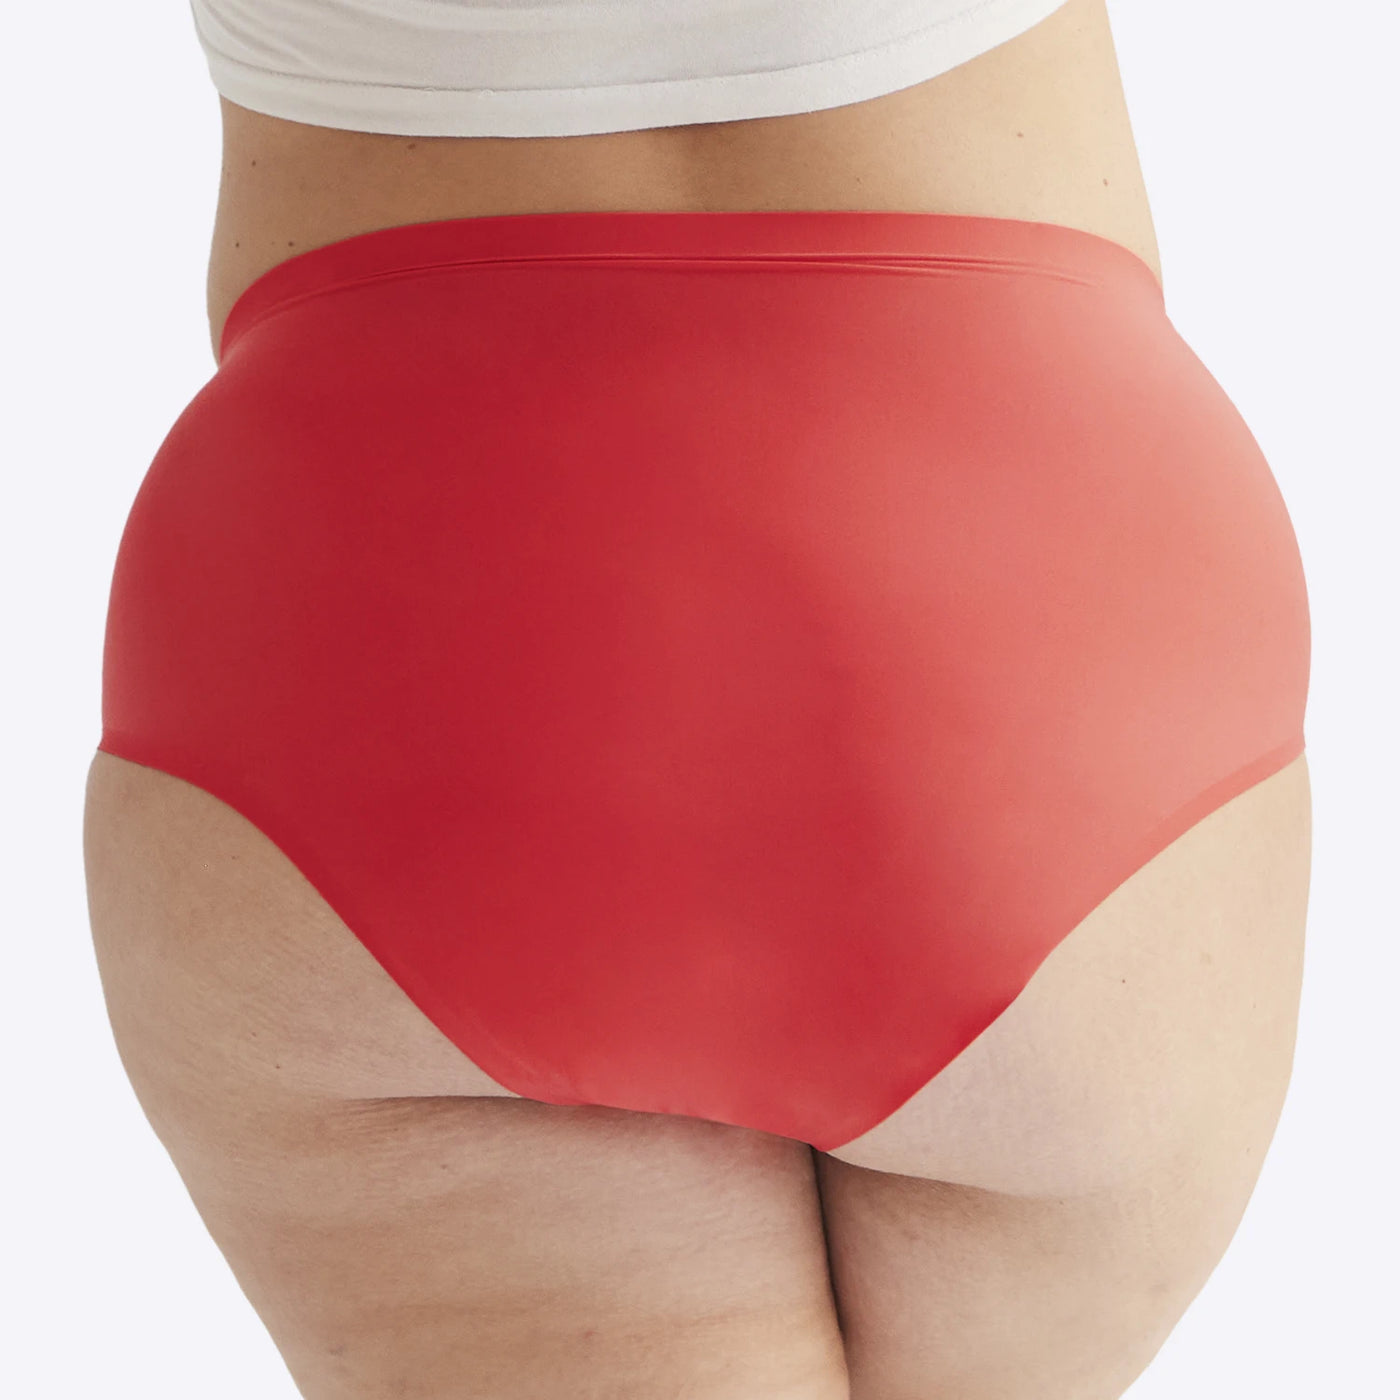 WUKA Drytech High Waist Incontinence Pants Style Coral Pink Colour Back